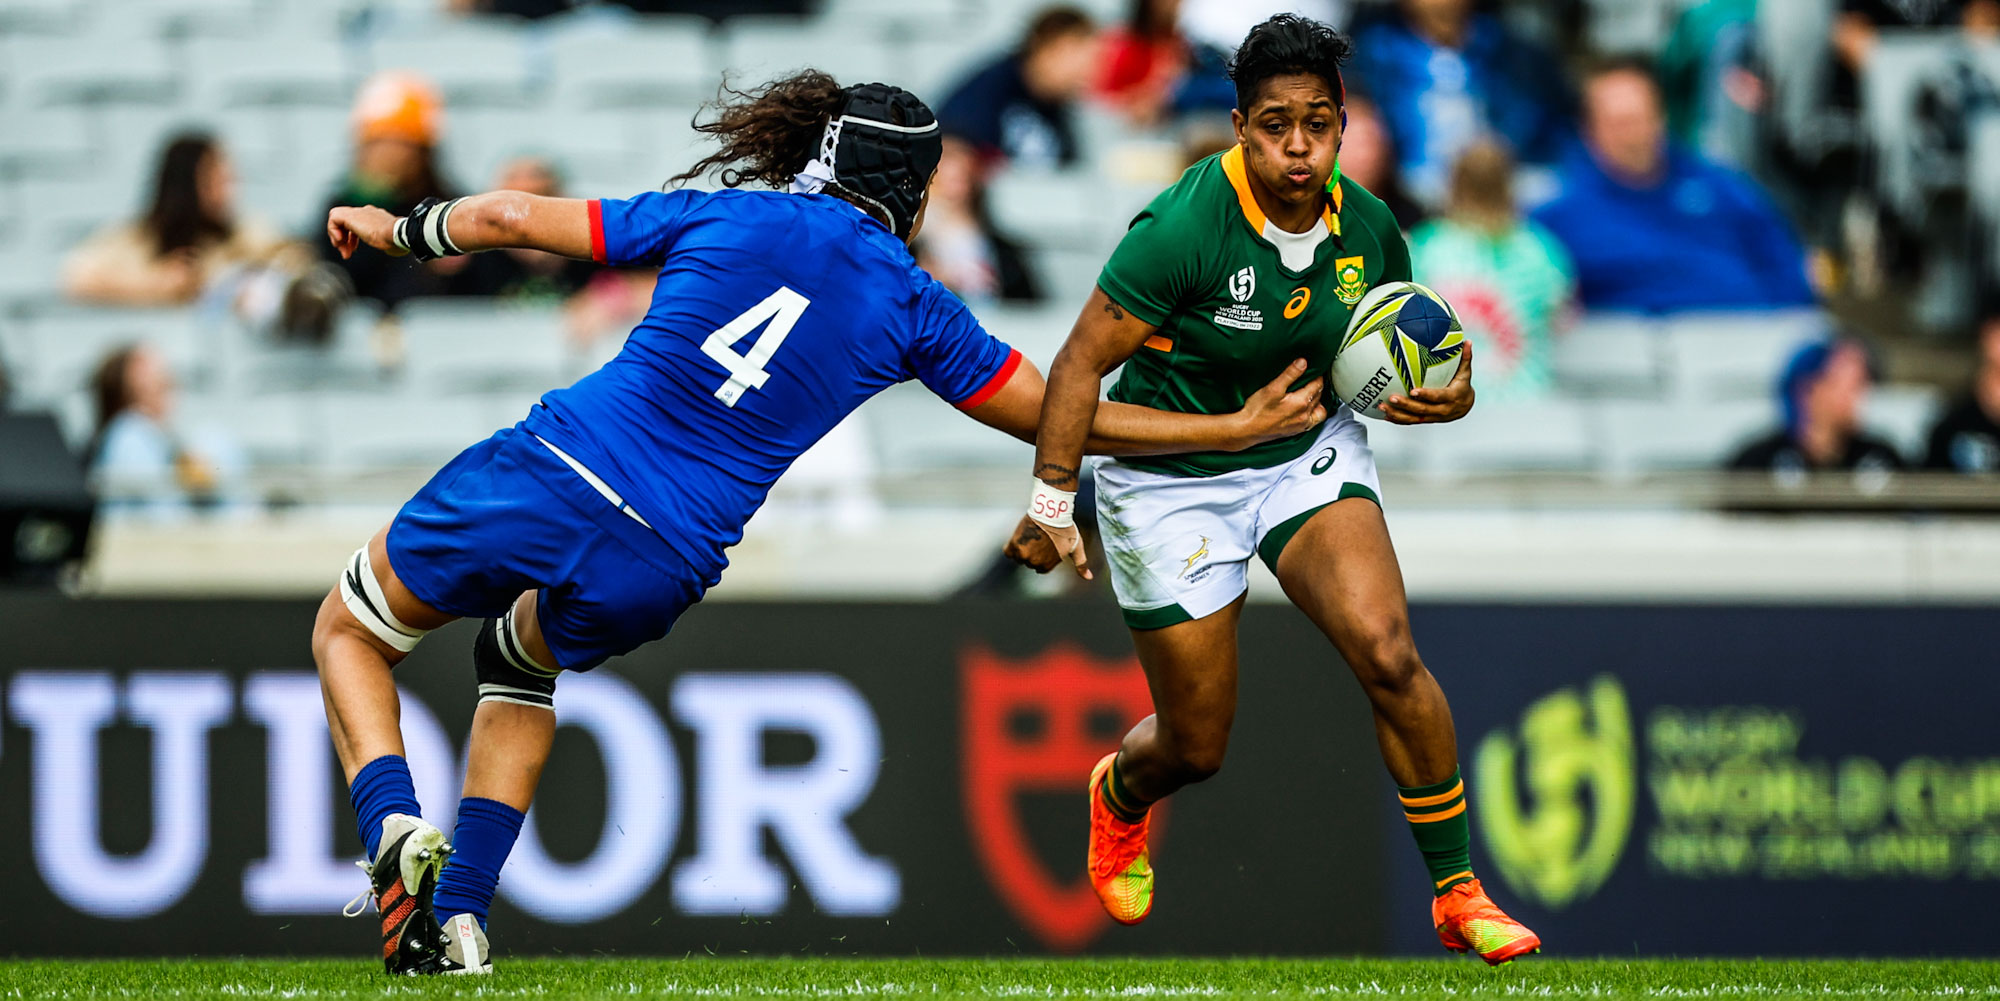 Zenay Jordaan will become the most-capped Springbok Women's player if she gets game-time off the bench.